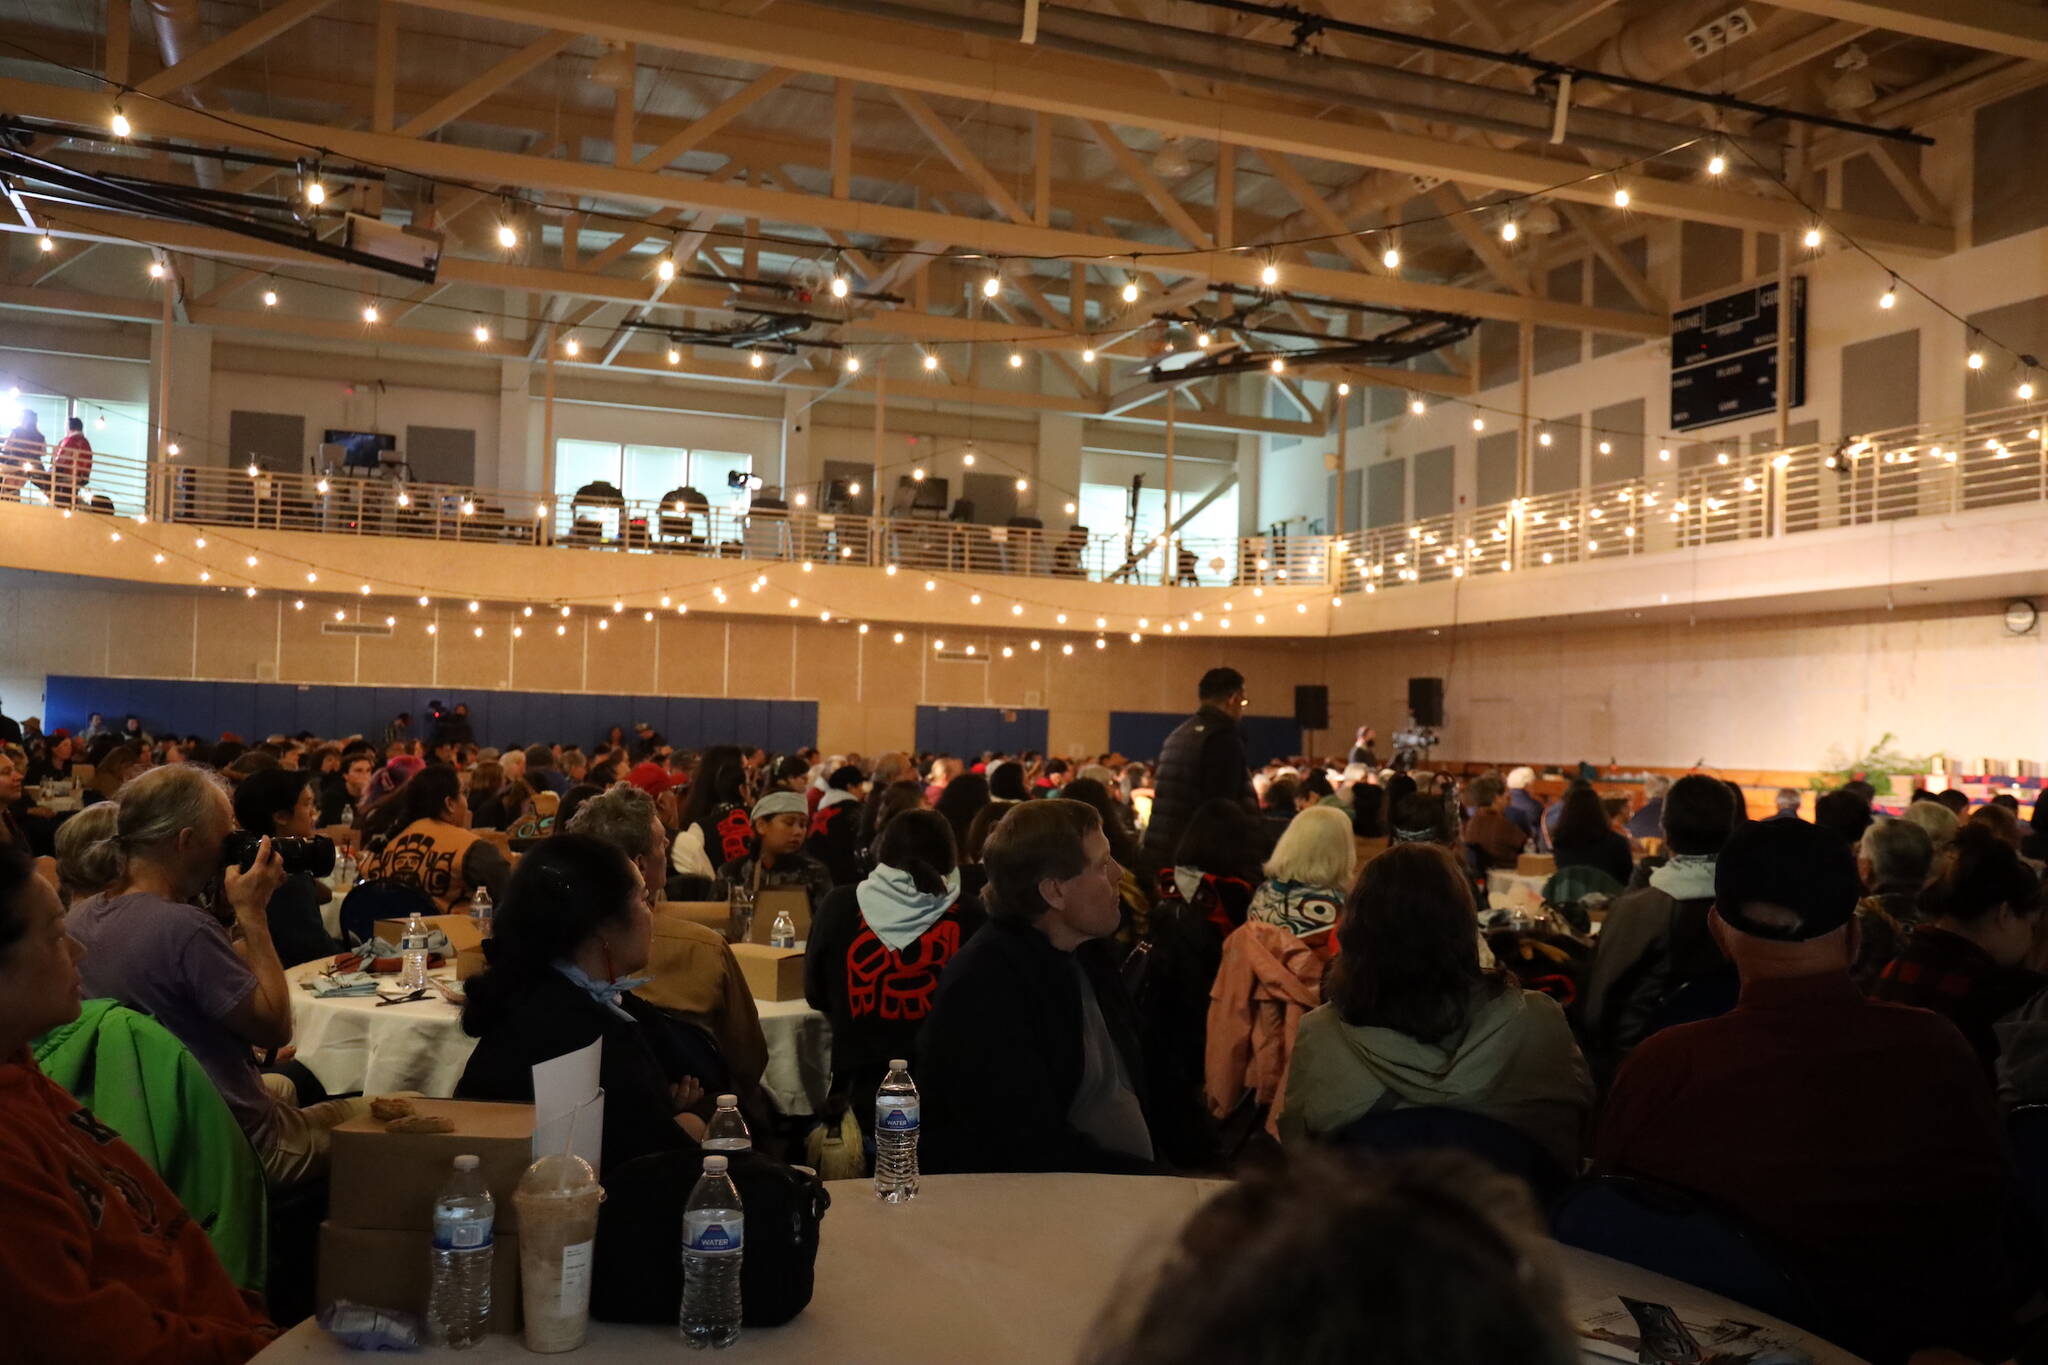 Hundreds gather to witness the global launch ceremony of the Moananuiākea voyage at the University of Alaska Recreation Center on Thursday afternoon. (Clarise Larson / Juneau Empire)